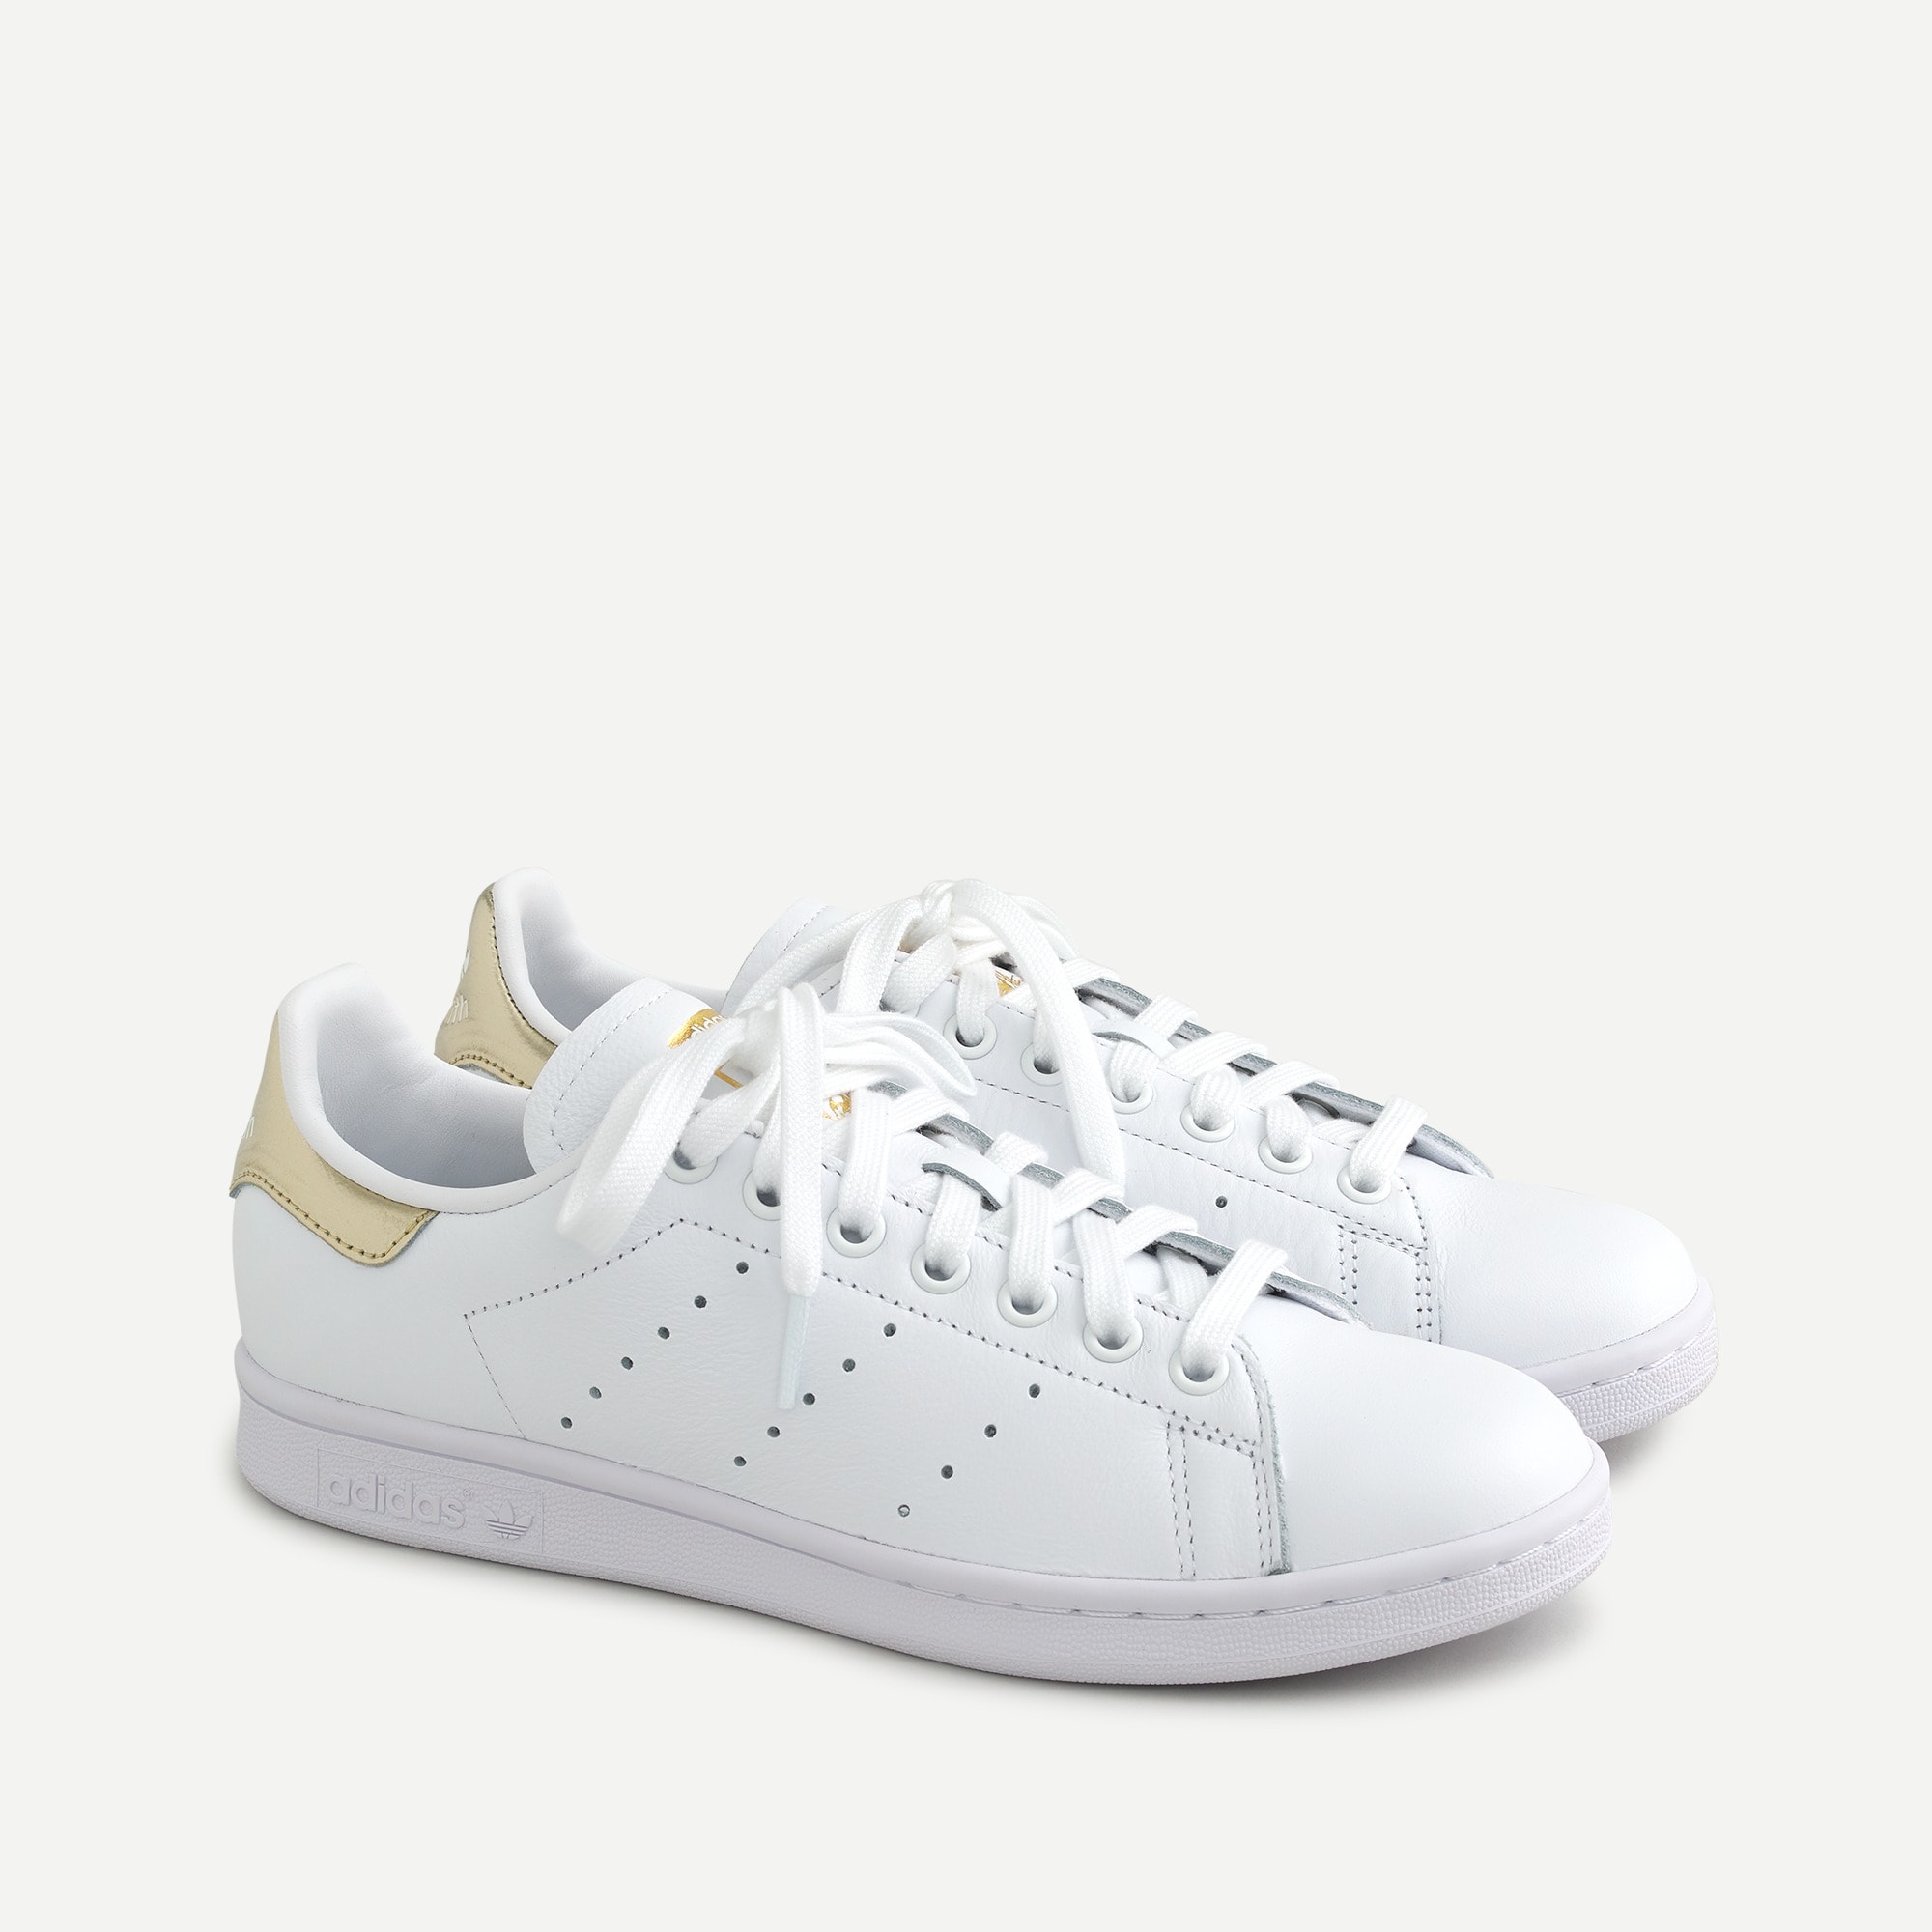 stansmith for women